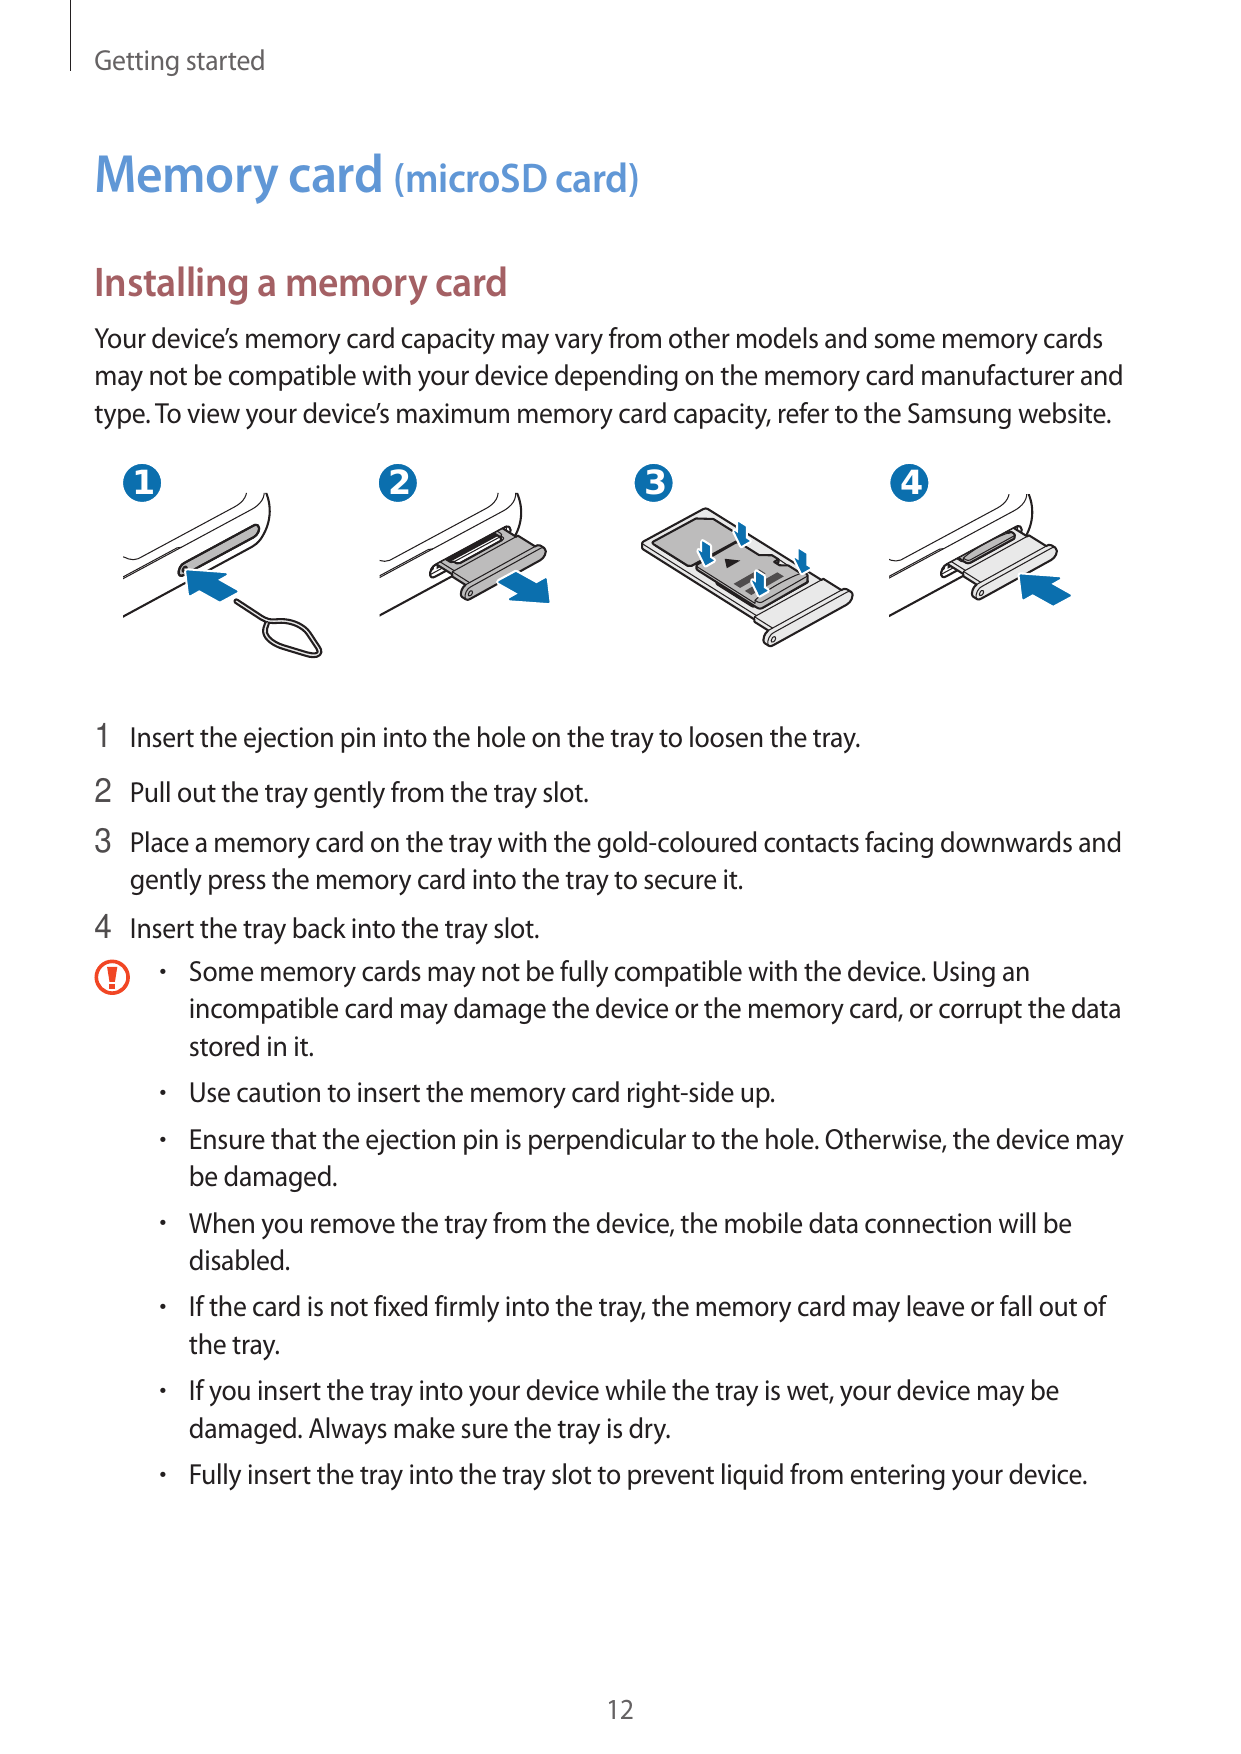 Getting startedMemory card (microSD card)Installing a memory cardYour device’s memory card capacity may vary from other models a